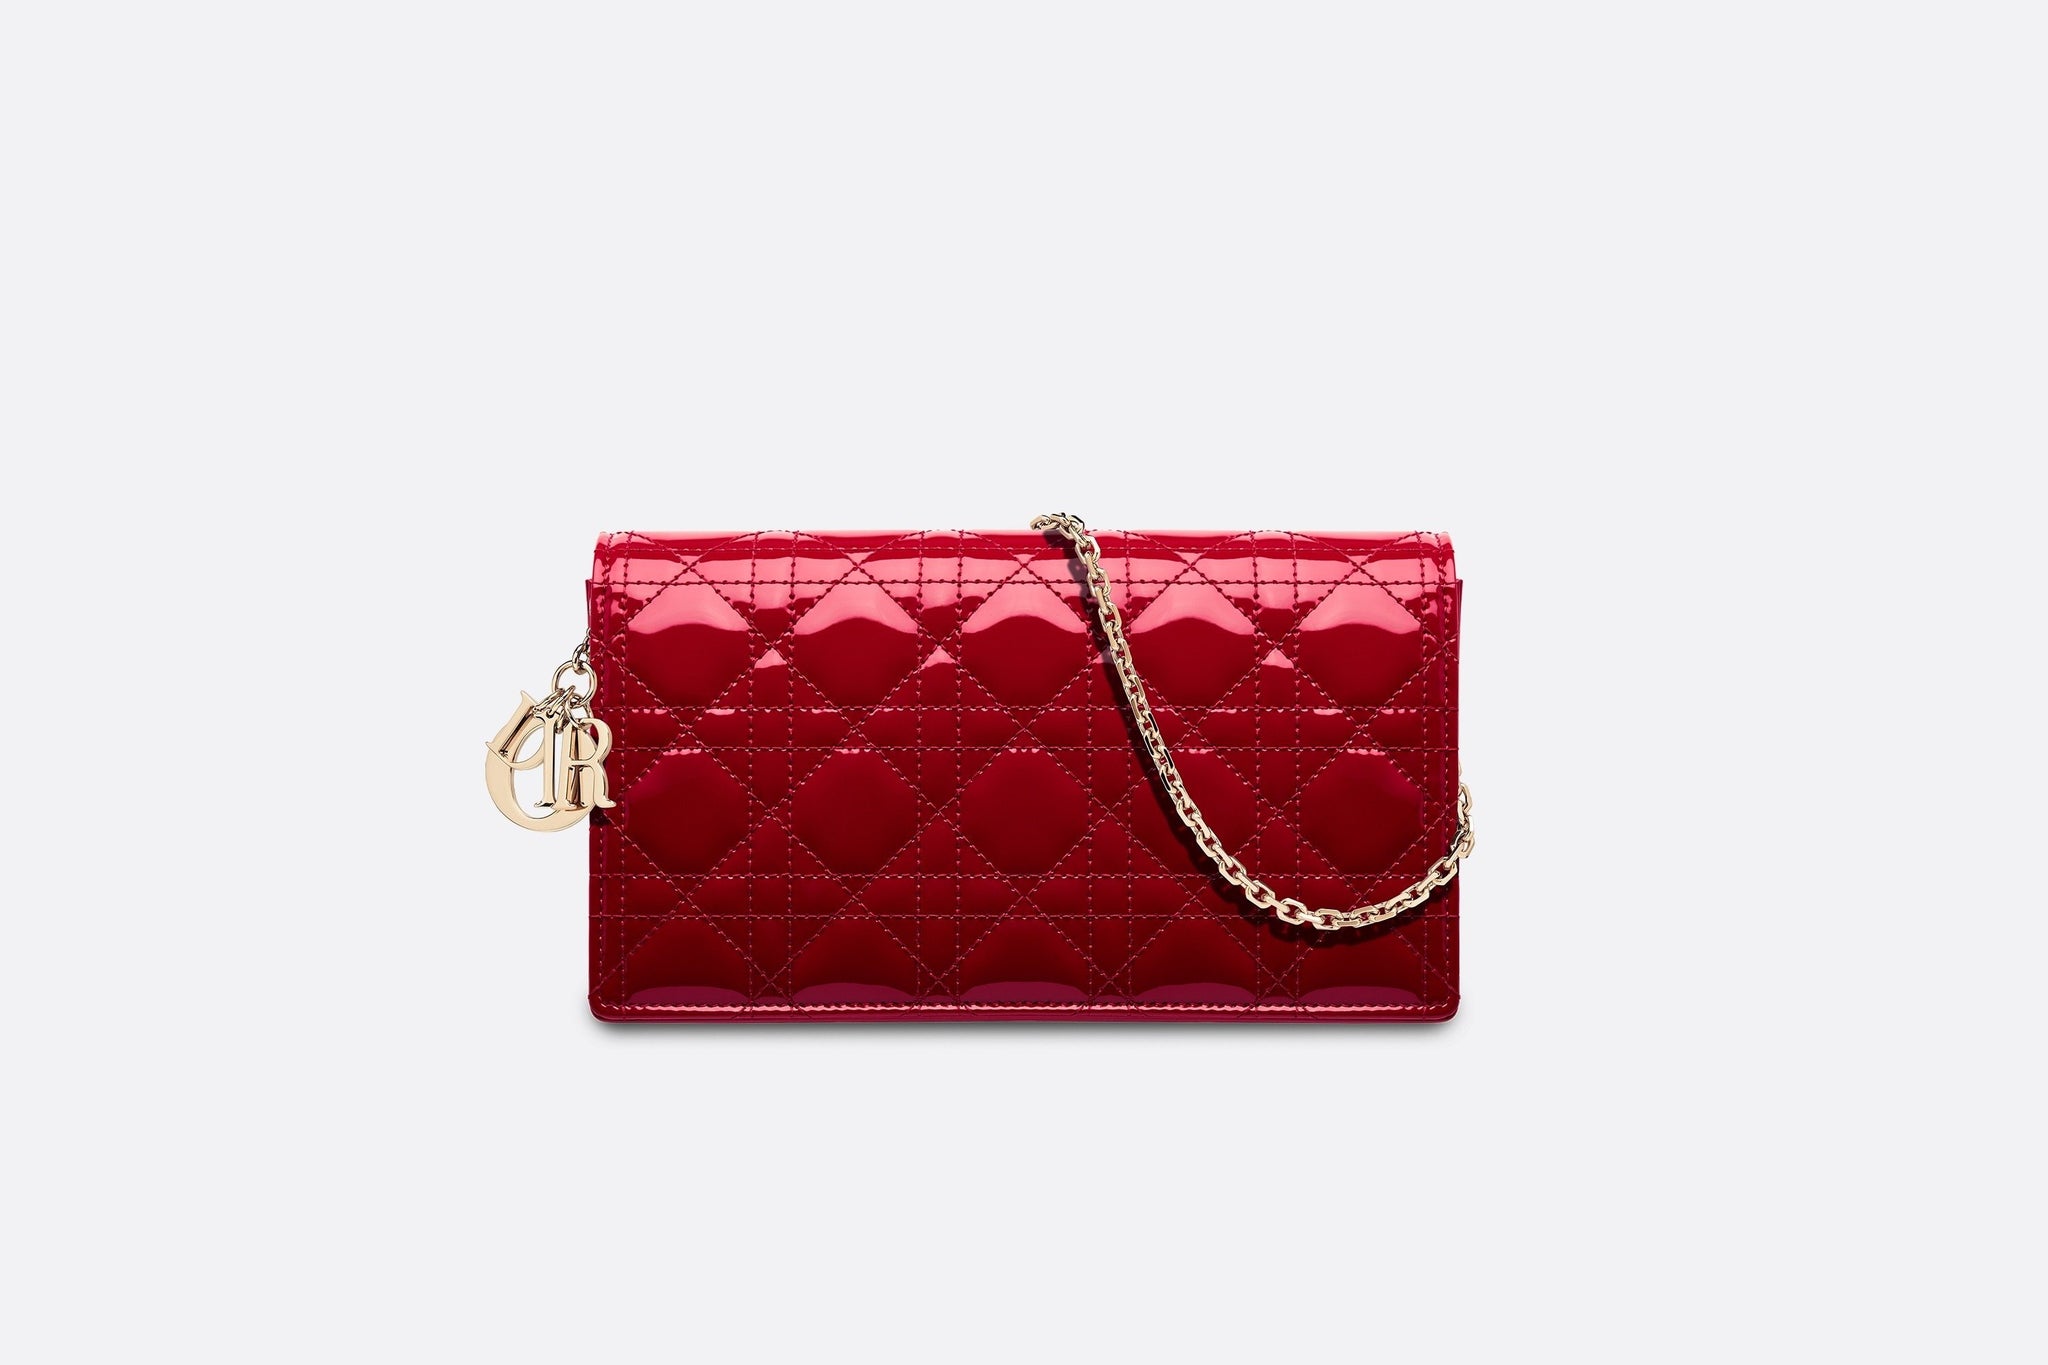 Mini Lady Dior Bag  Cherry Red Cannage Patent Calfskin  Dior Couture UAE